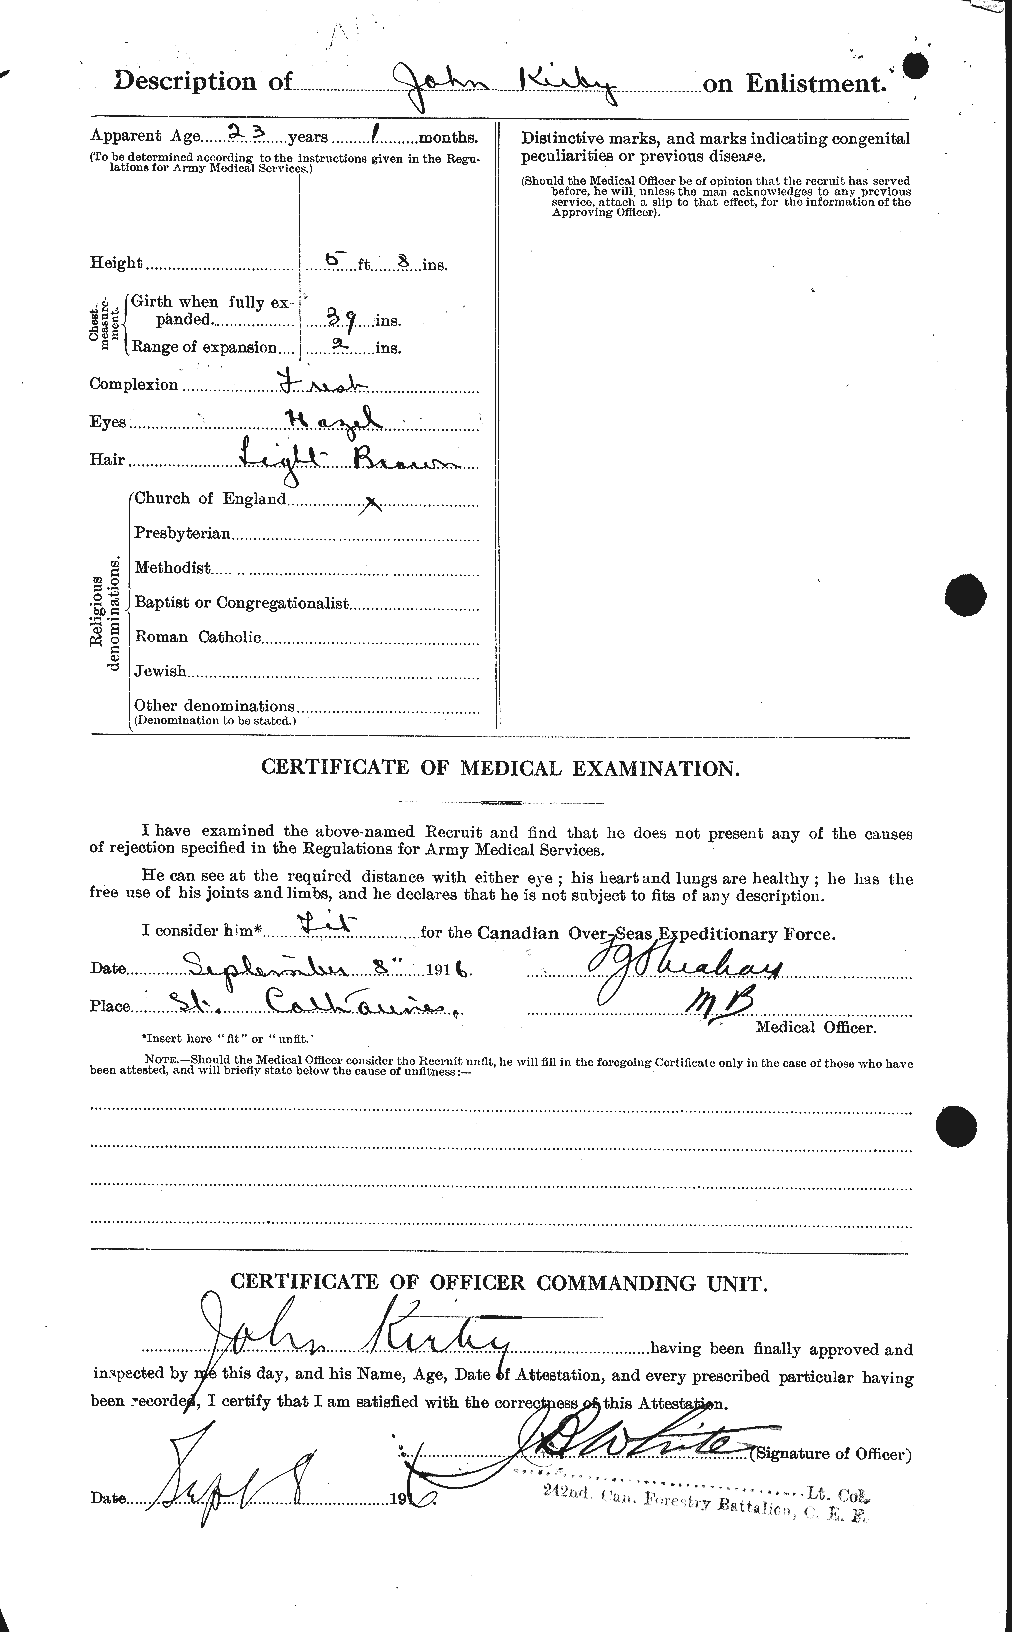 Personnel Records of the First World War - CEF 437224b